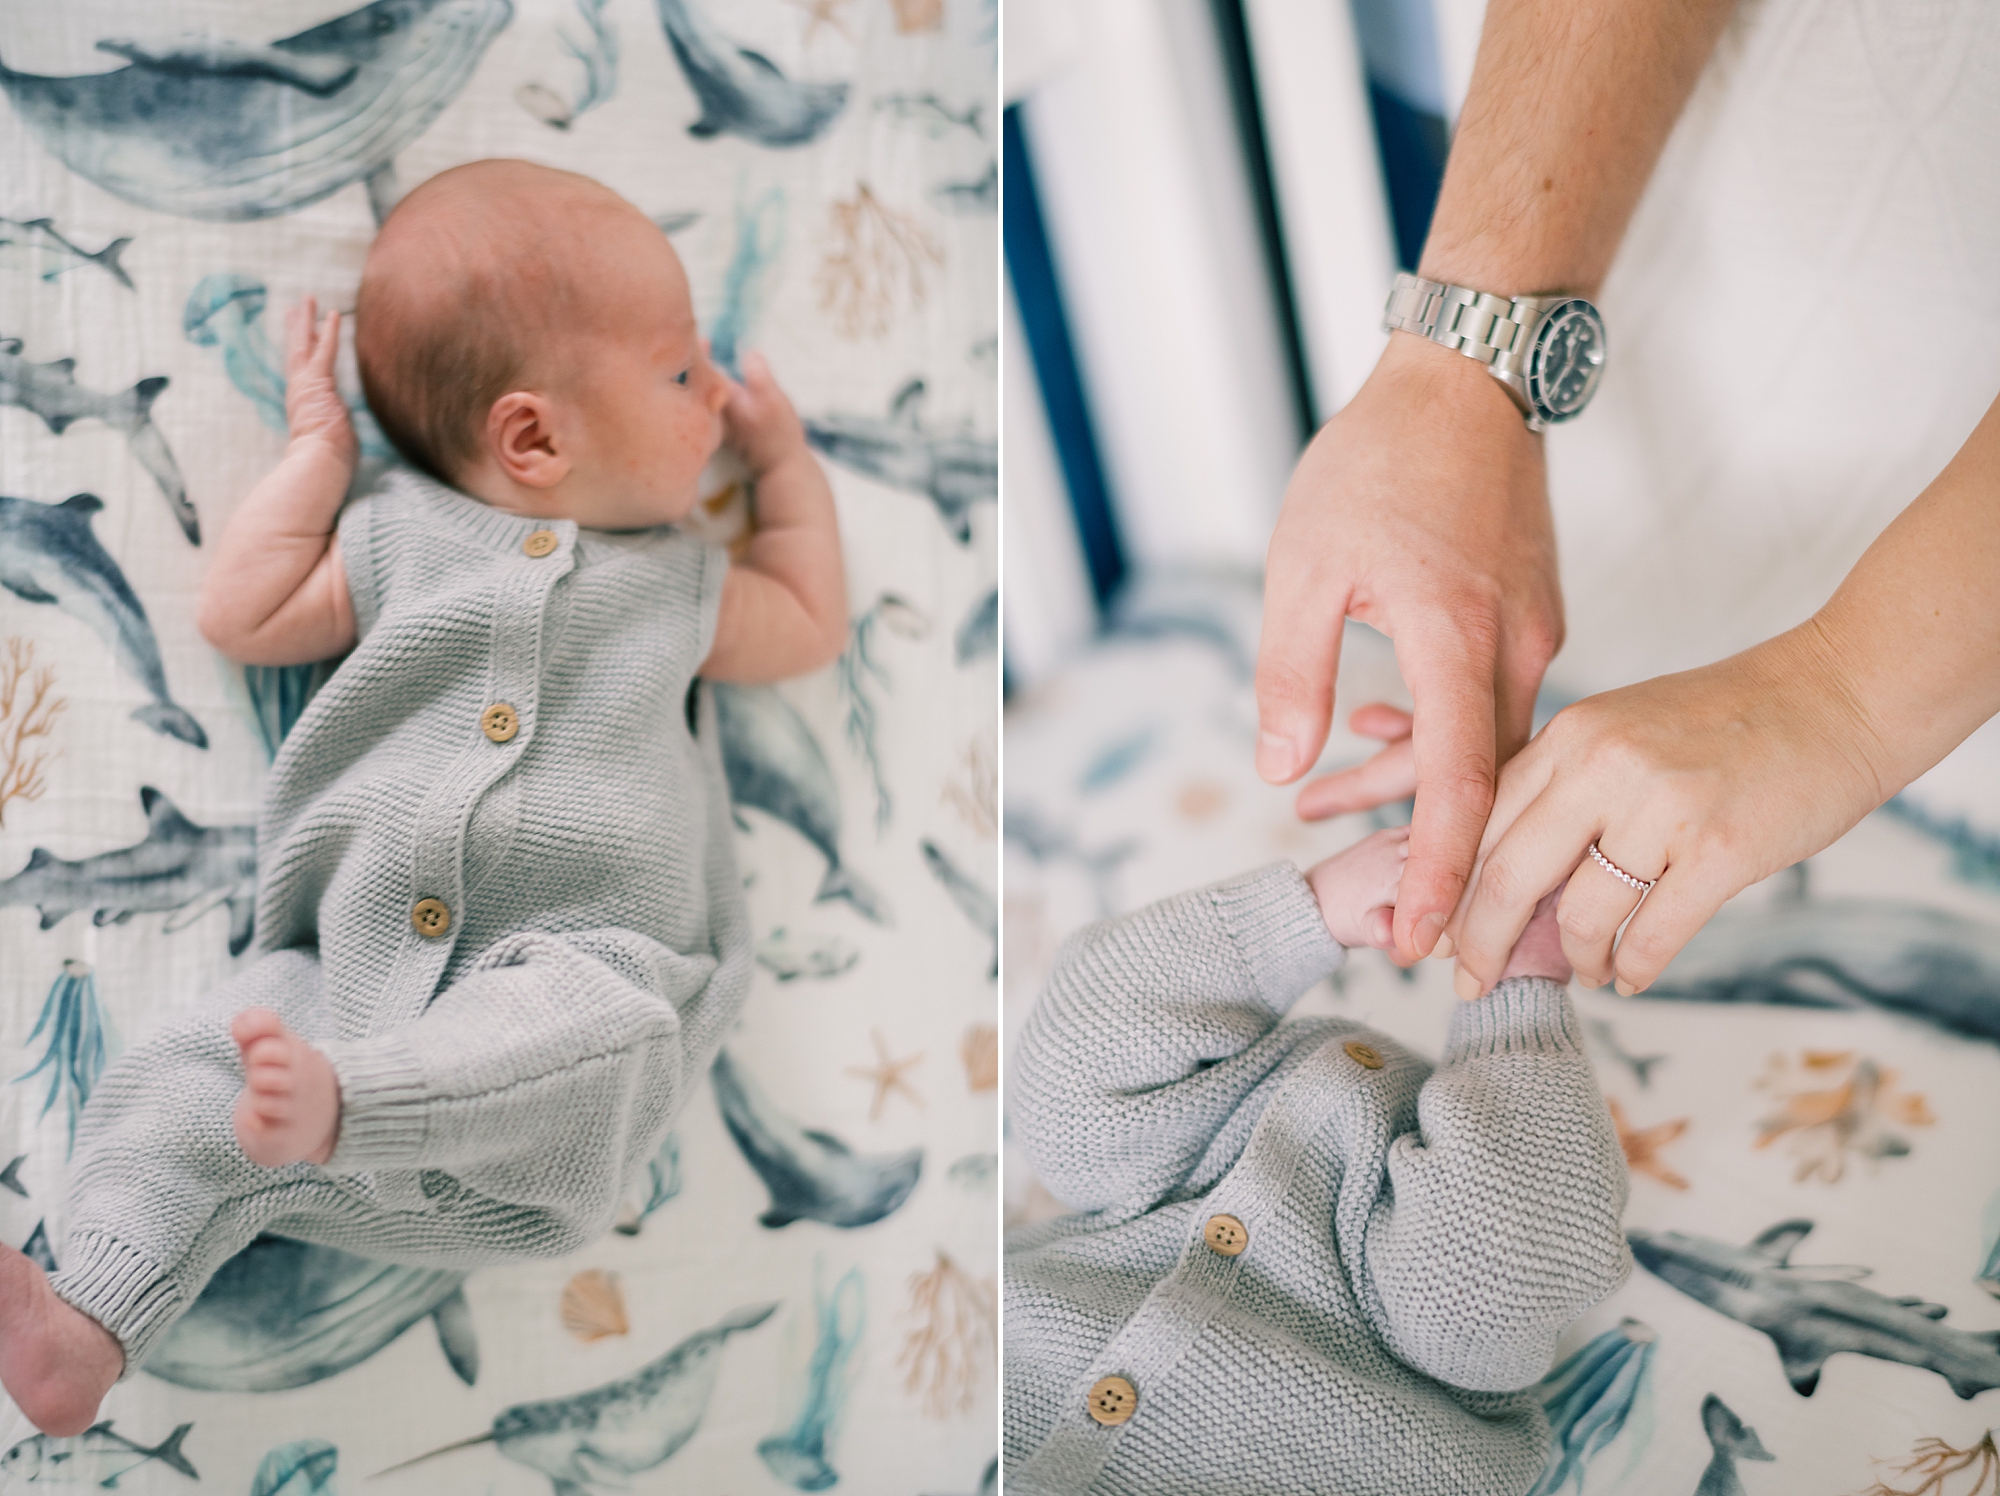 baby in grey knit outfit lays on bed with nautical sheets 